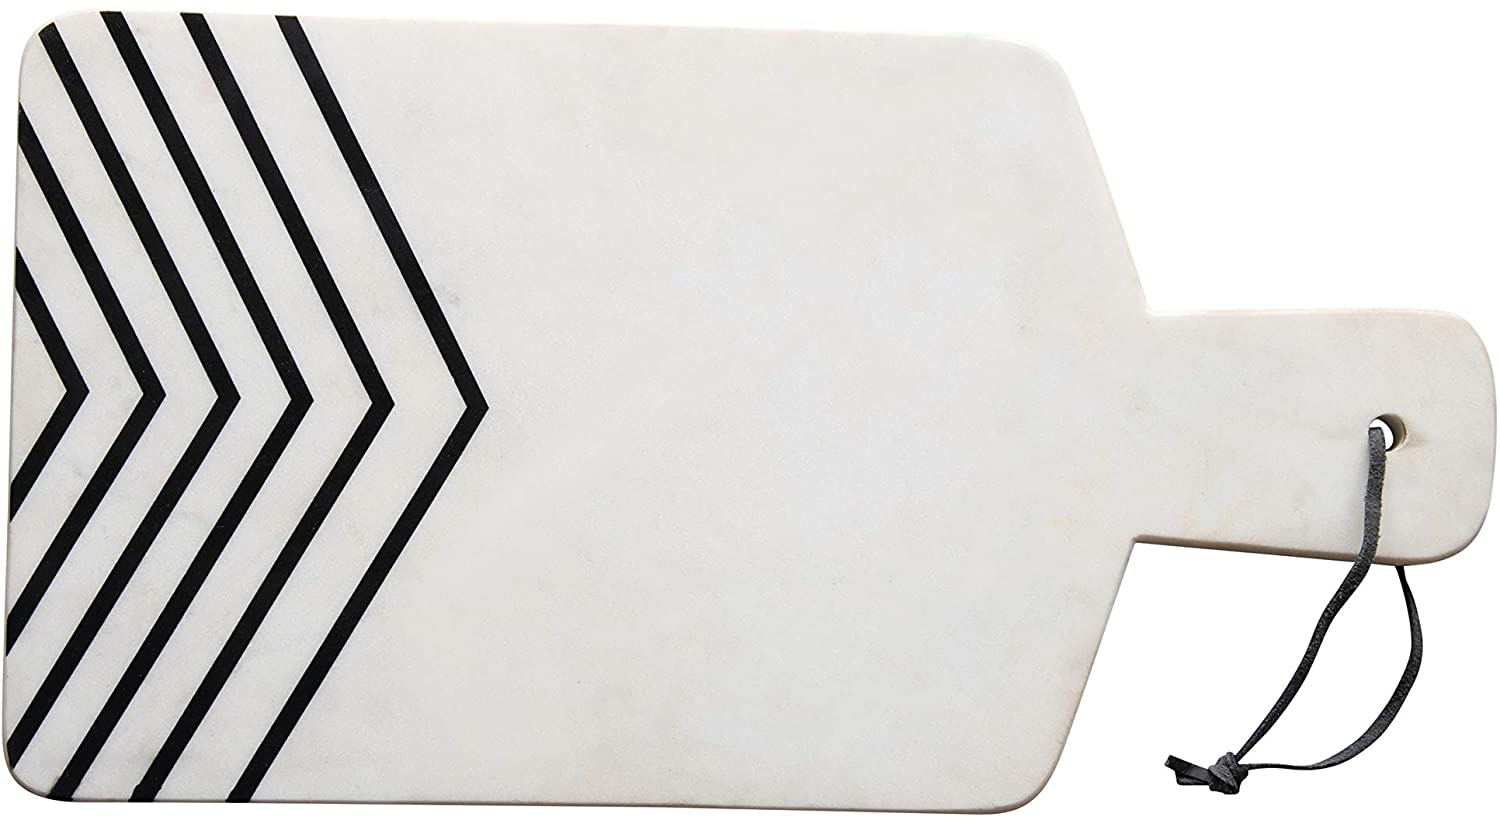 White and Black Chevron Marble Cheese/Cutting Board - Image 1